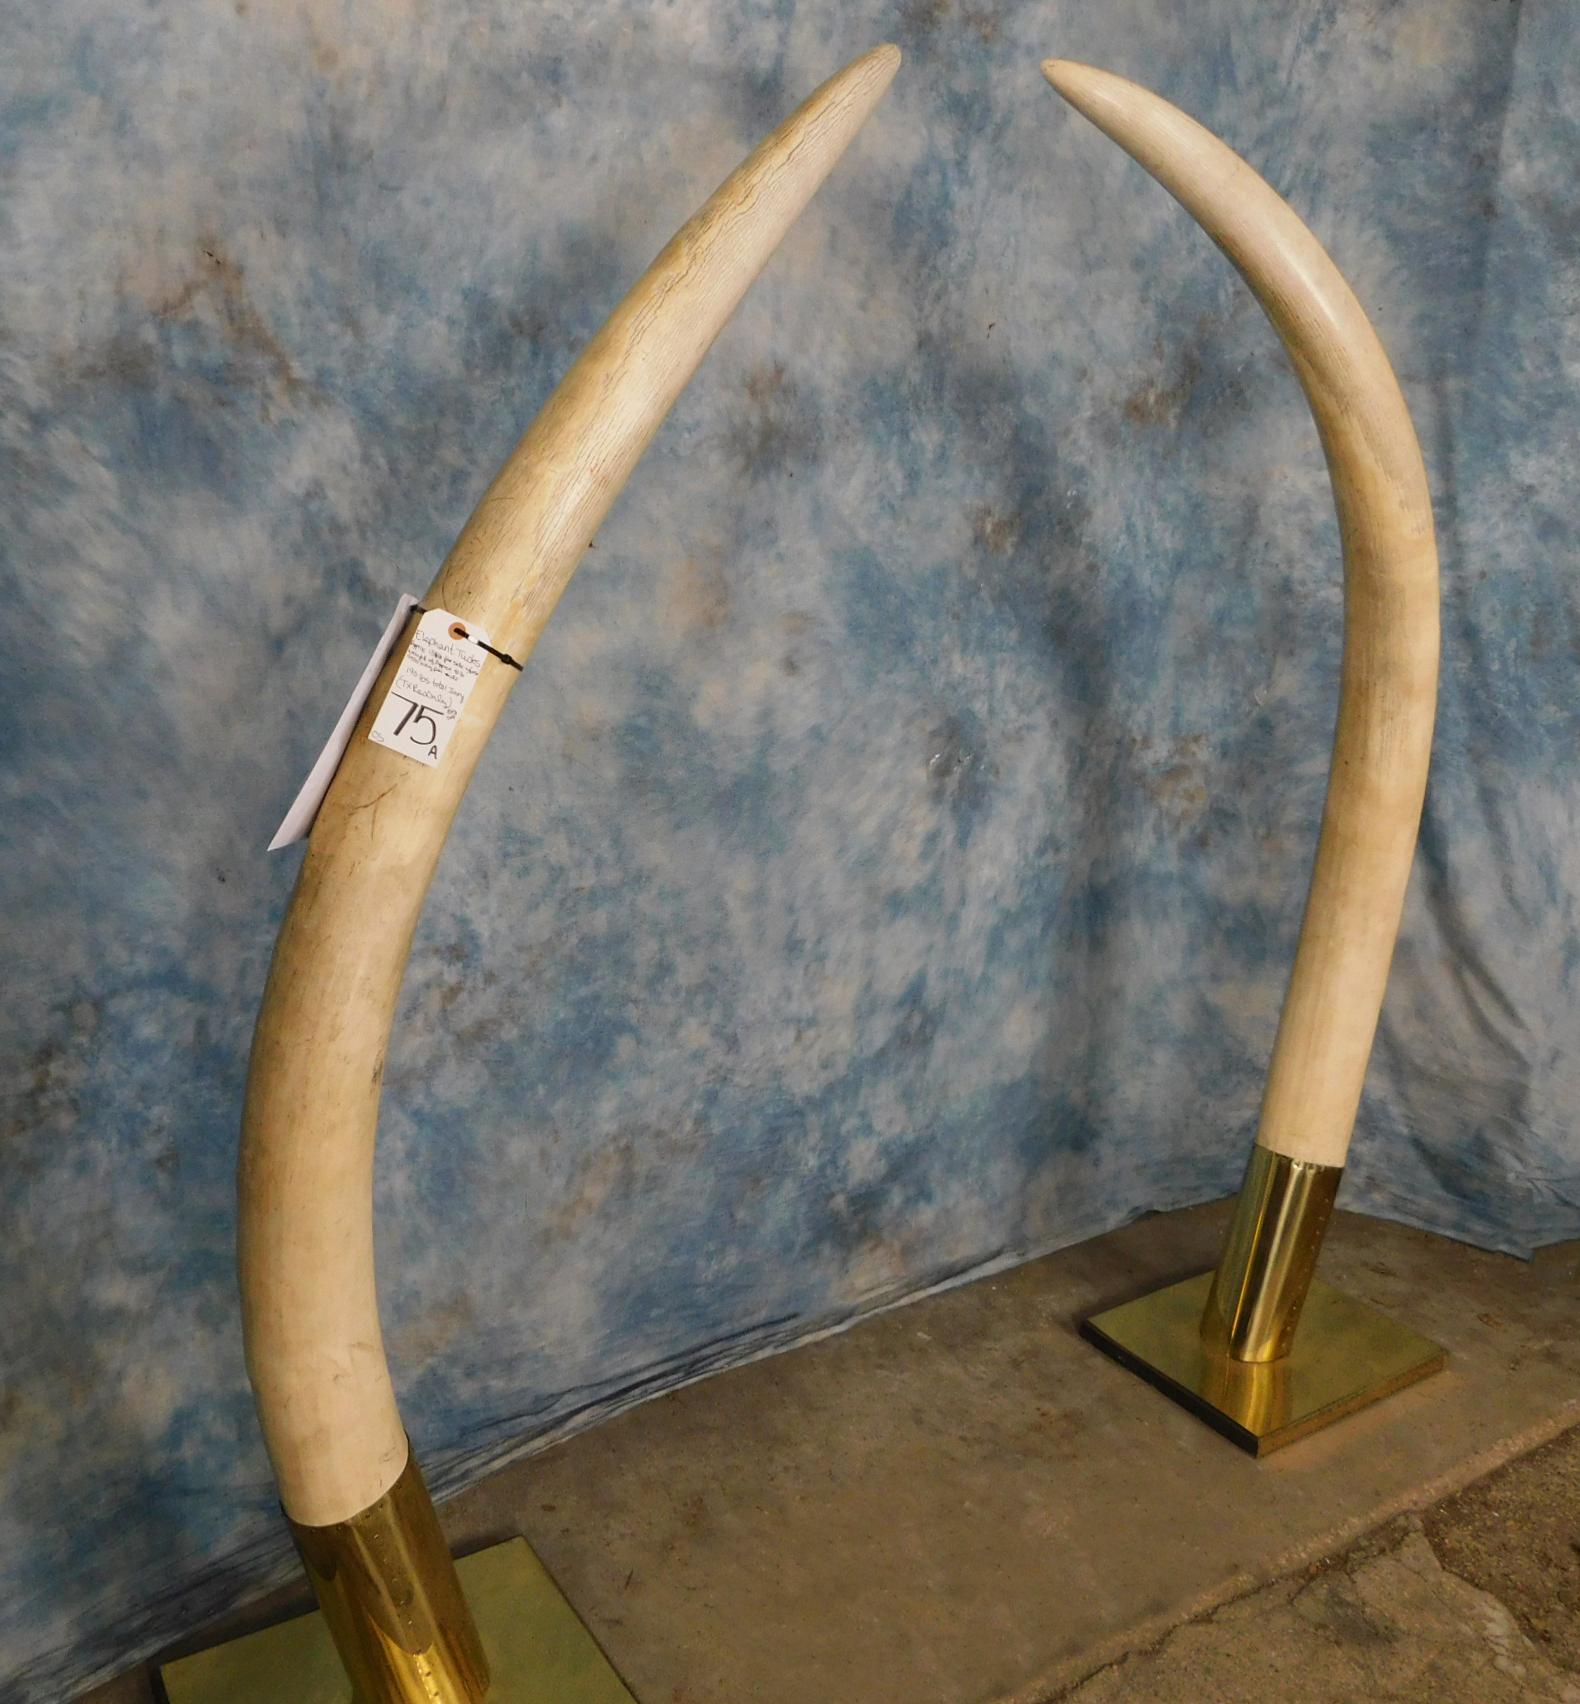 PAIR OF ELEPHANT TUSK  (TX RESIDENTS ONLY)